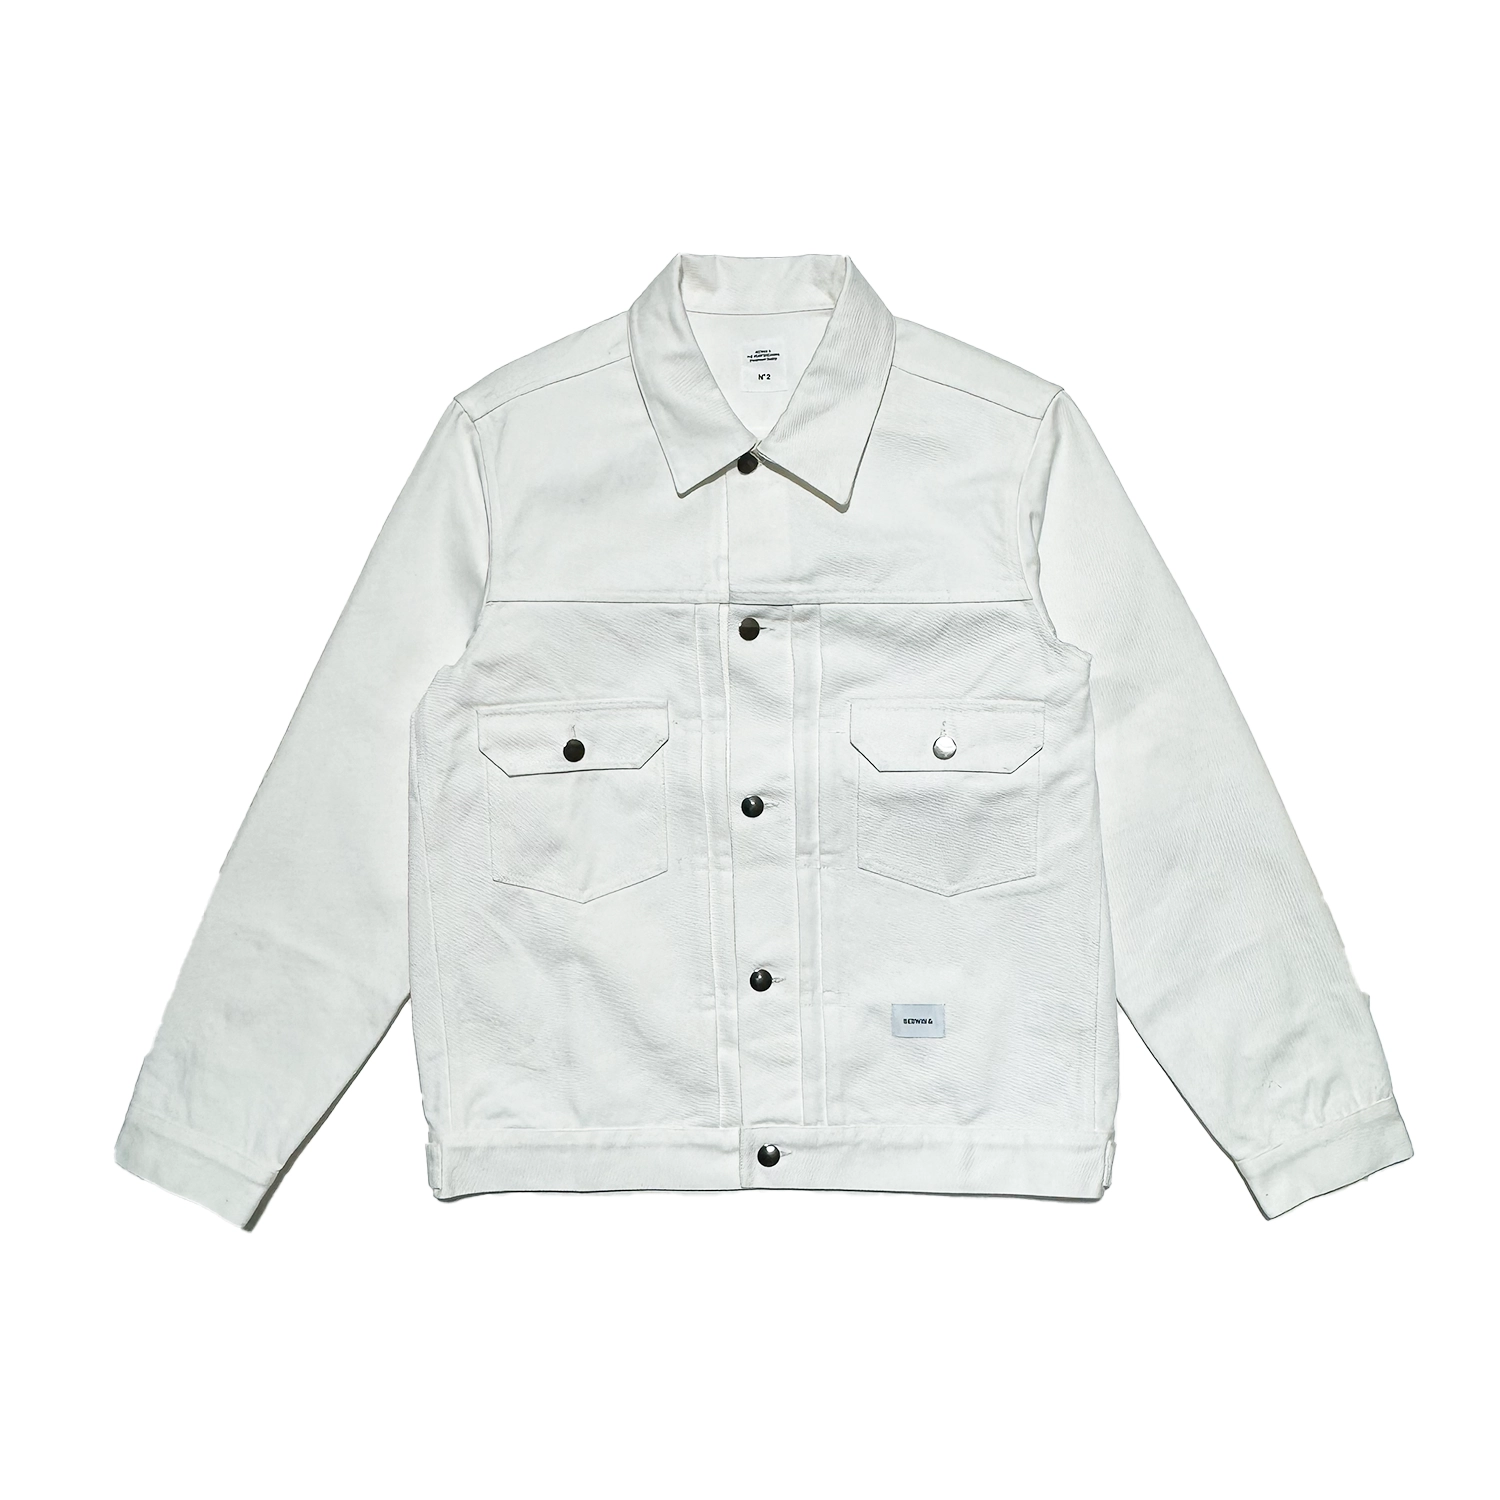 BEDWIN & THE HEARTBREAKERS の 2ND TYPE JACKET "CASSIDY"